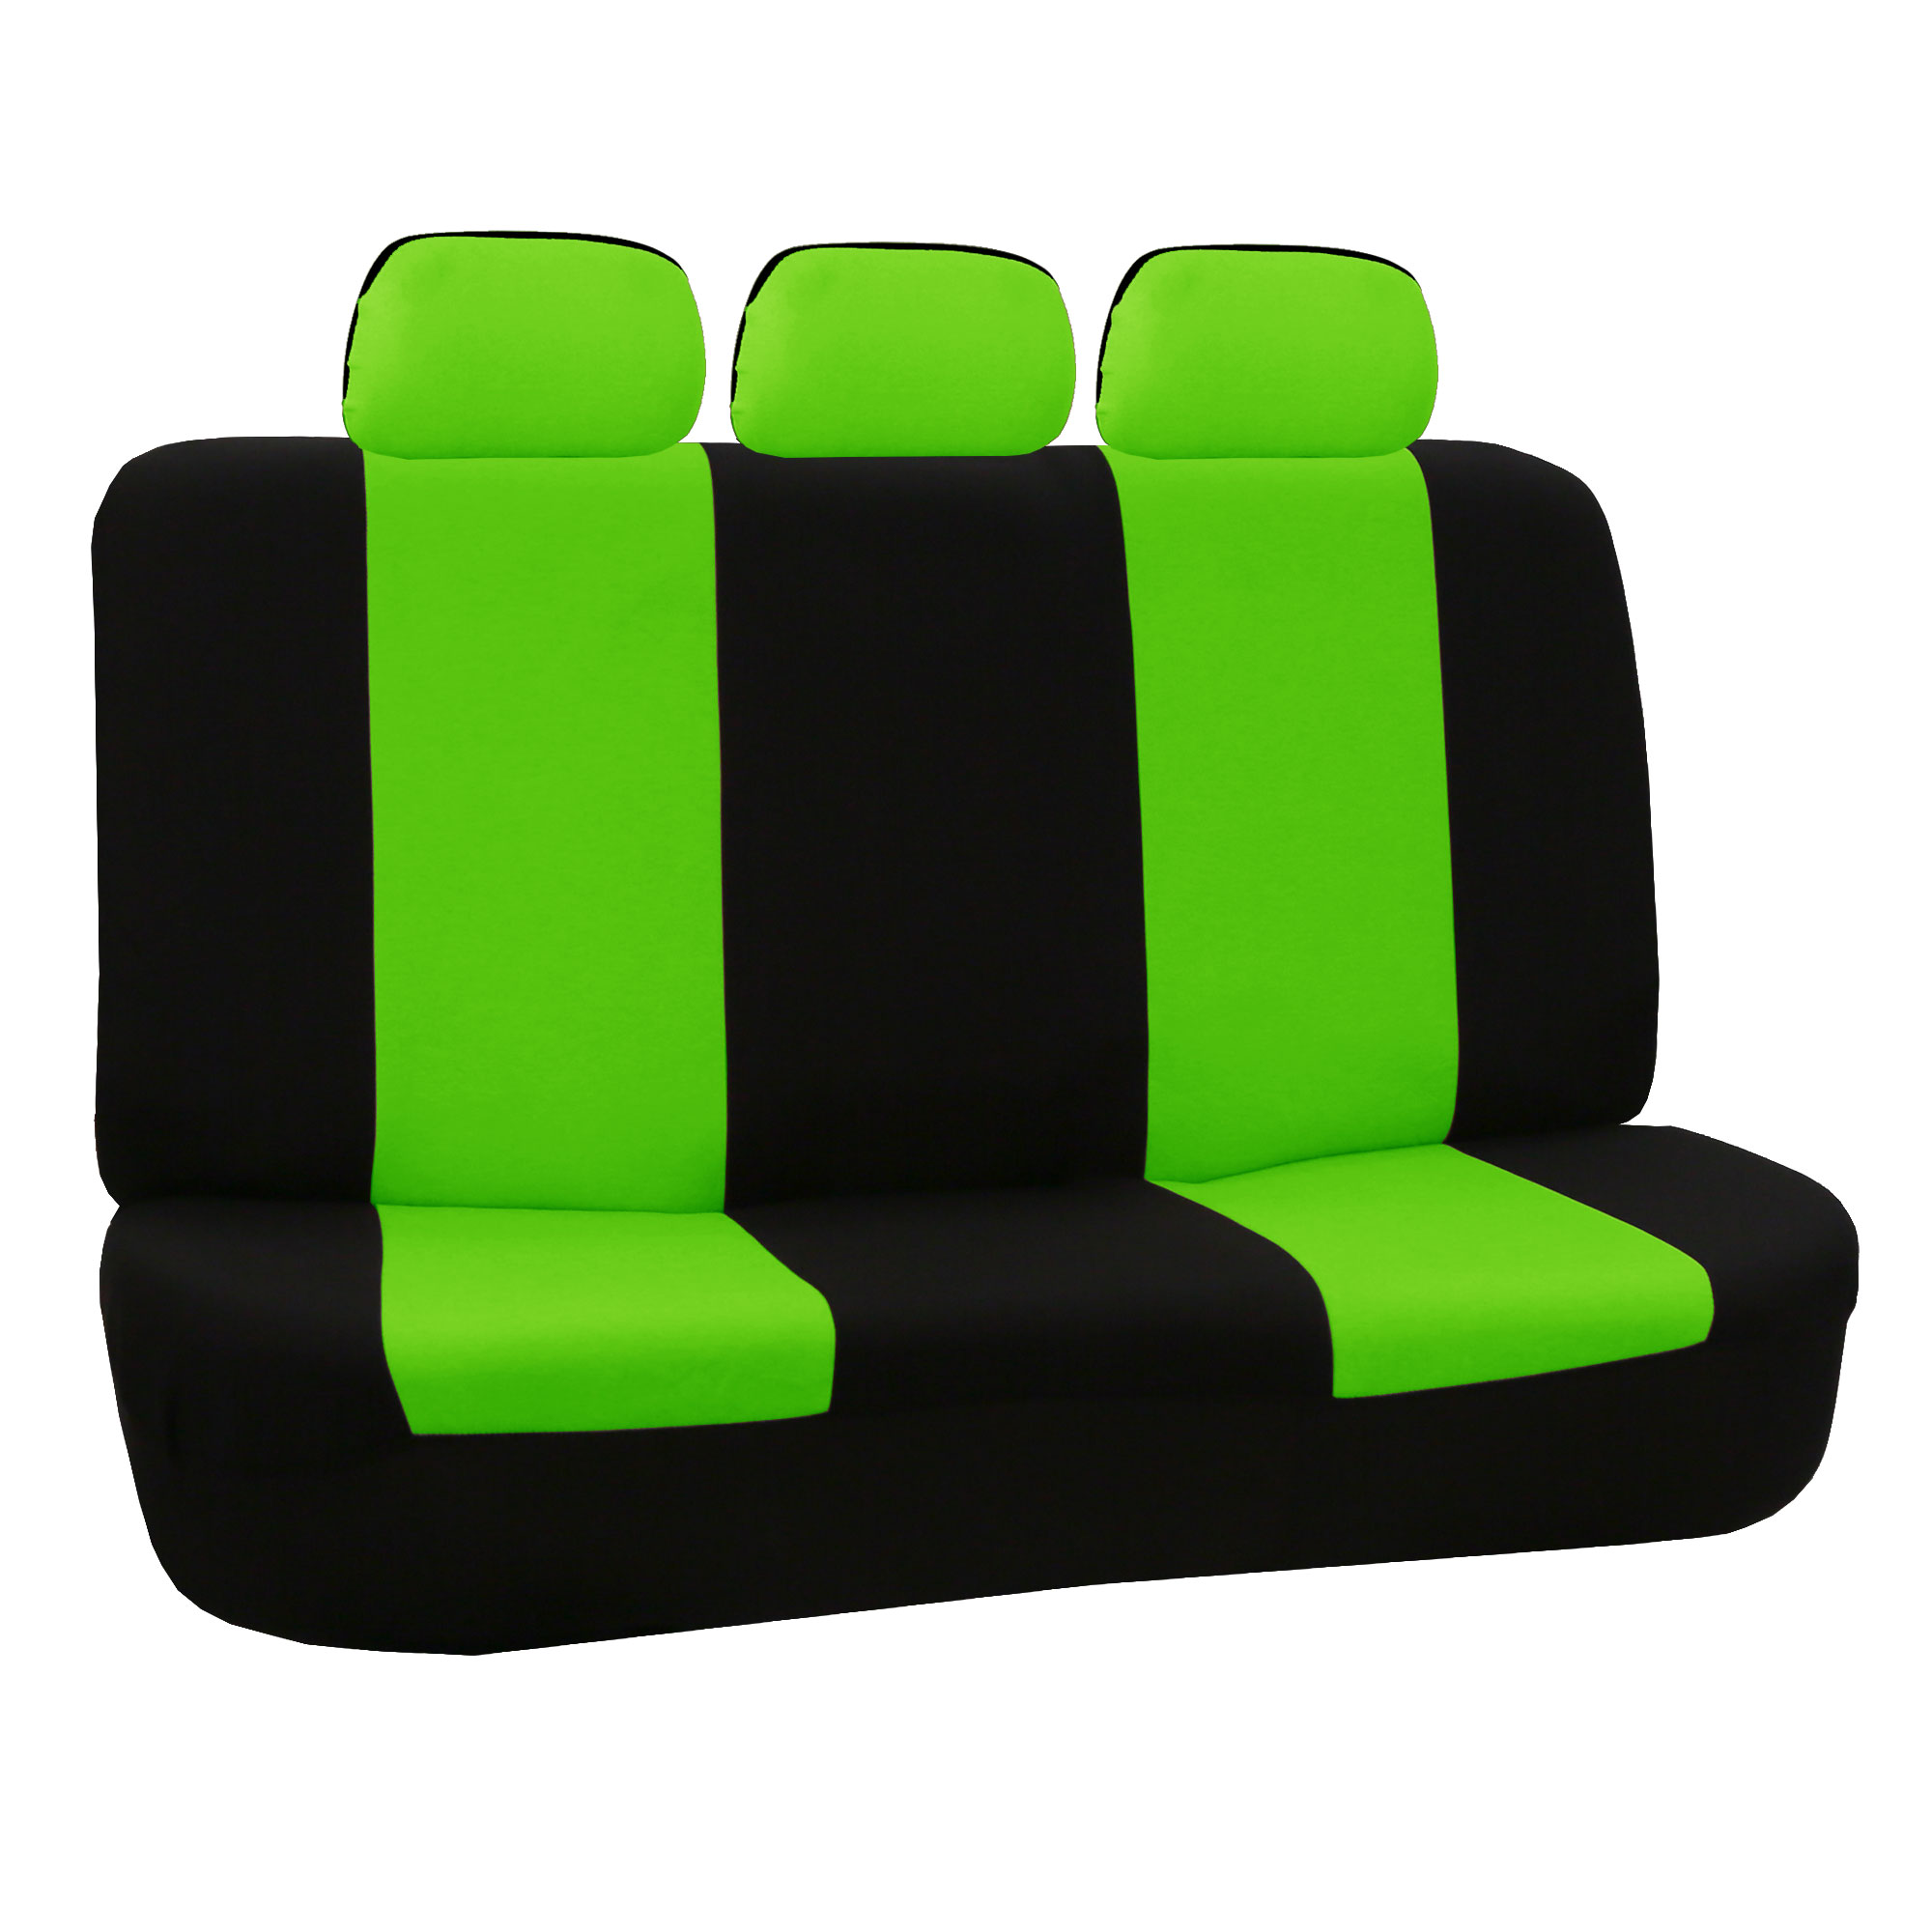 FH Group Universal Flat Cloth Fabric 5 Headrests Full Set Car Seat Cover, Green and Black - image 2 of 2